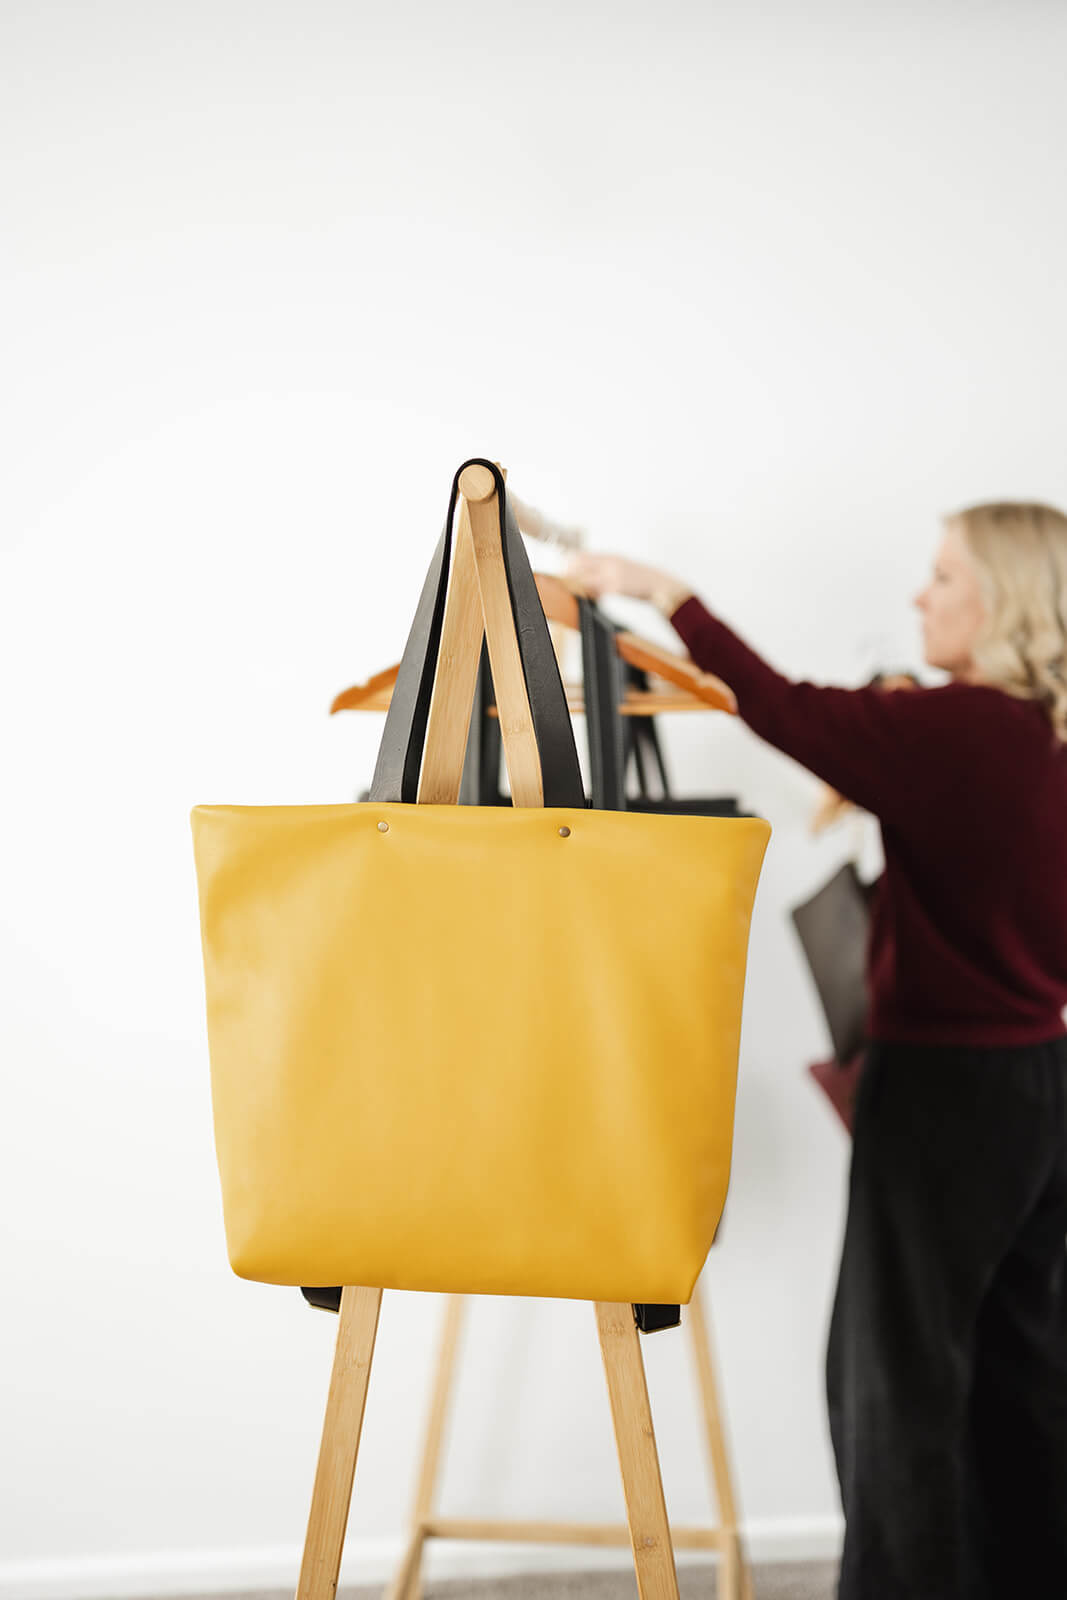 Yellow Leather Backpack & Tote in Ella Jackson brand hanging on timber clothes rack as a tote and showing black leather tote straps. Designer and Maker, Ella Jackson standing behind adjusting bags on hooks and wearing black pants and a maroon jumper with wavy blonde hair